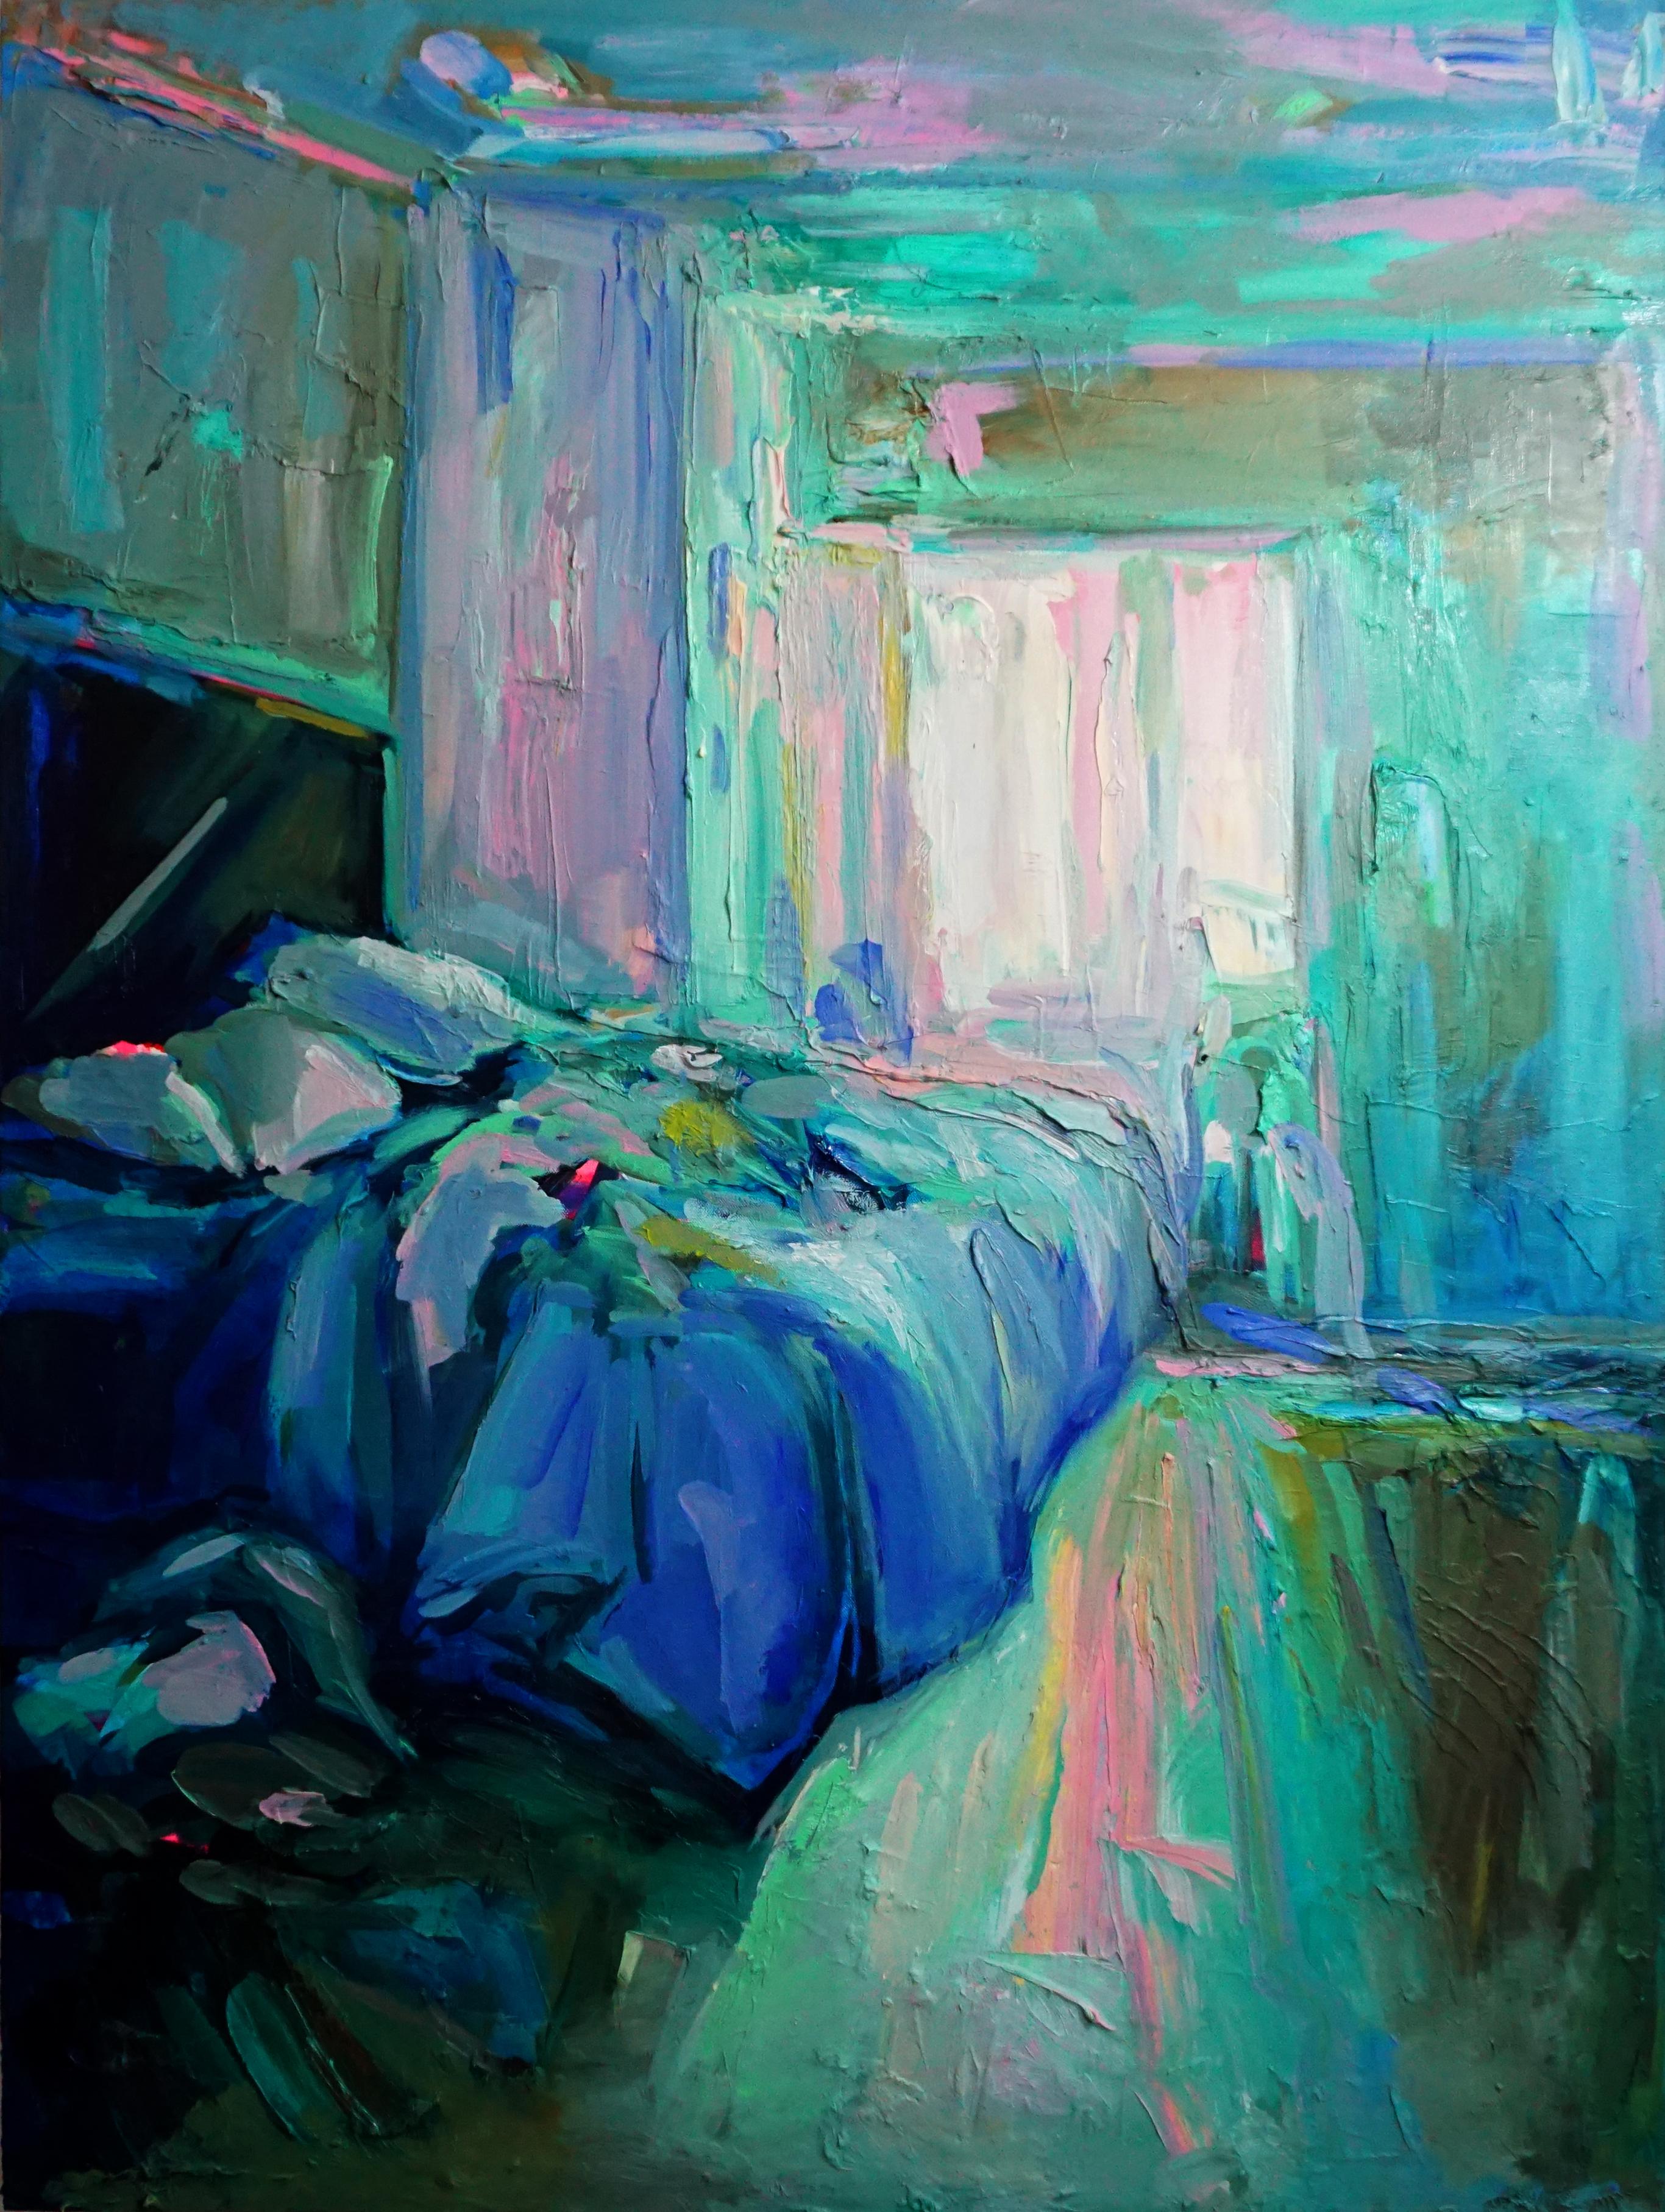 Ekaterina Popova Interior Painting - "The Letter", Expressive and textured interior bedroom painting, Oil on canvas 